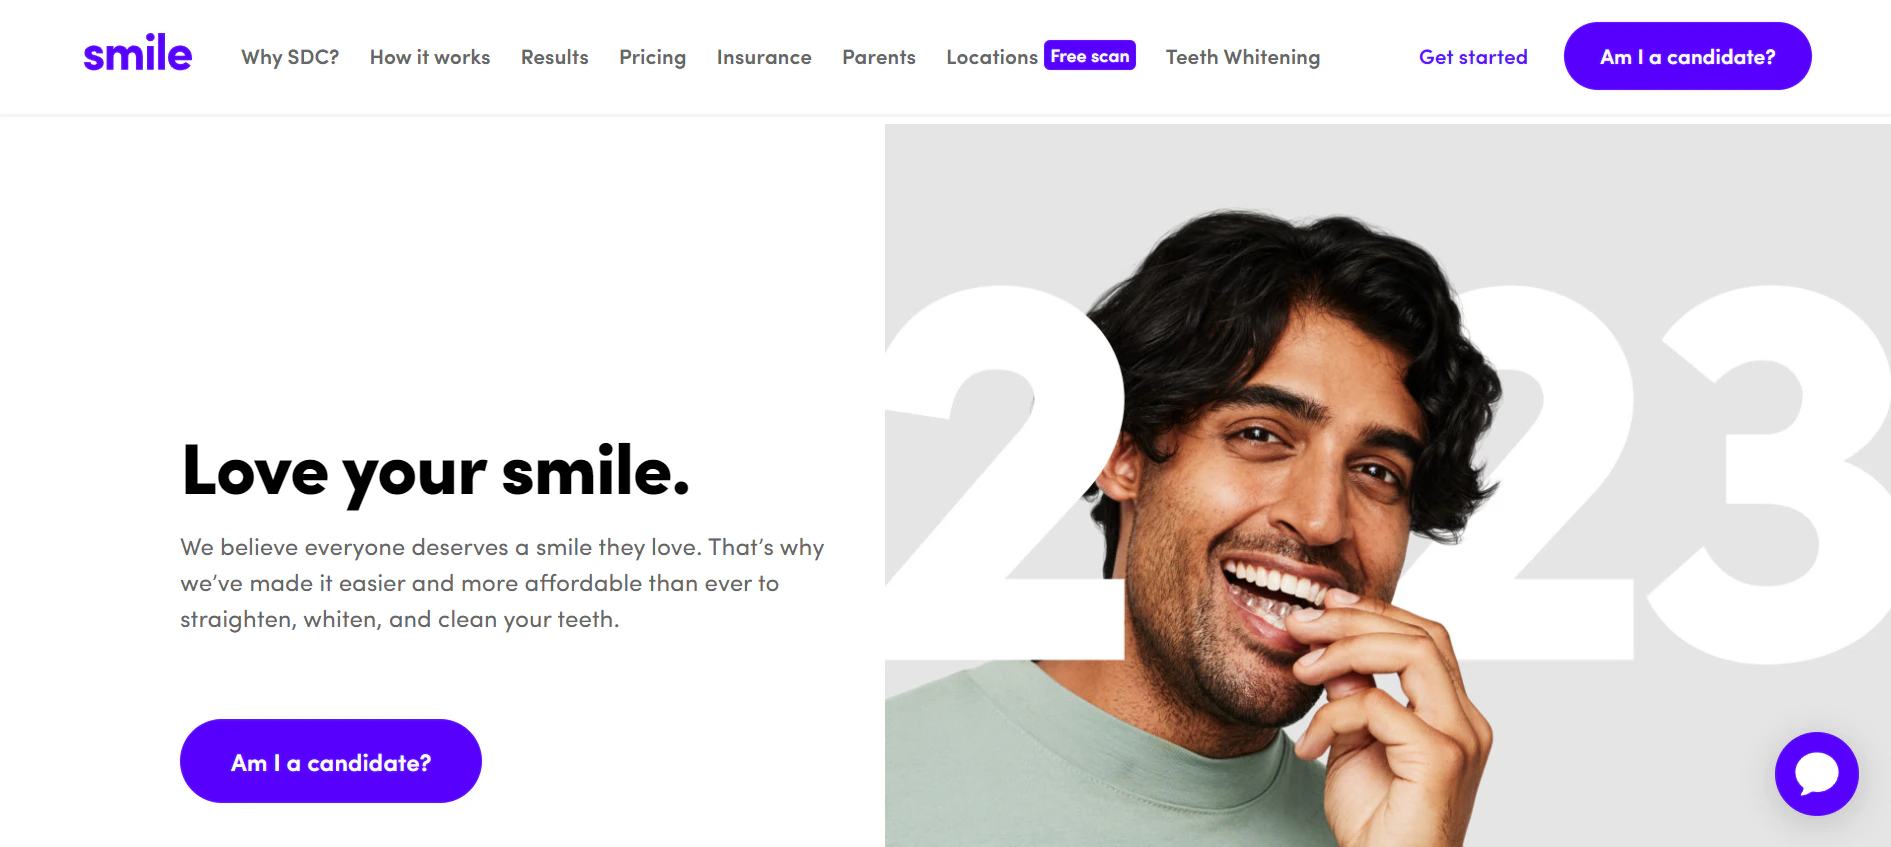 smile direct is a great example of a shopify store